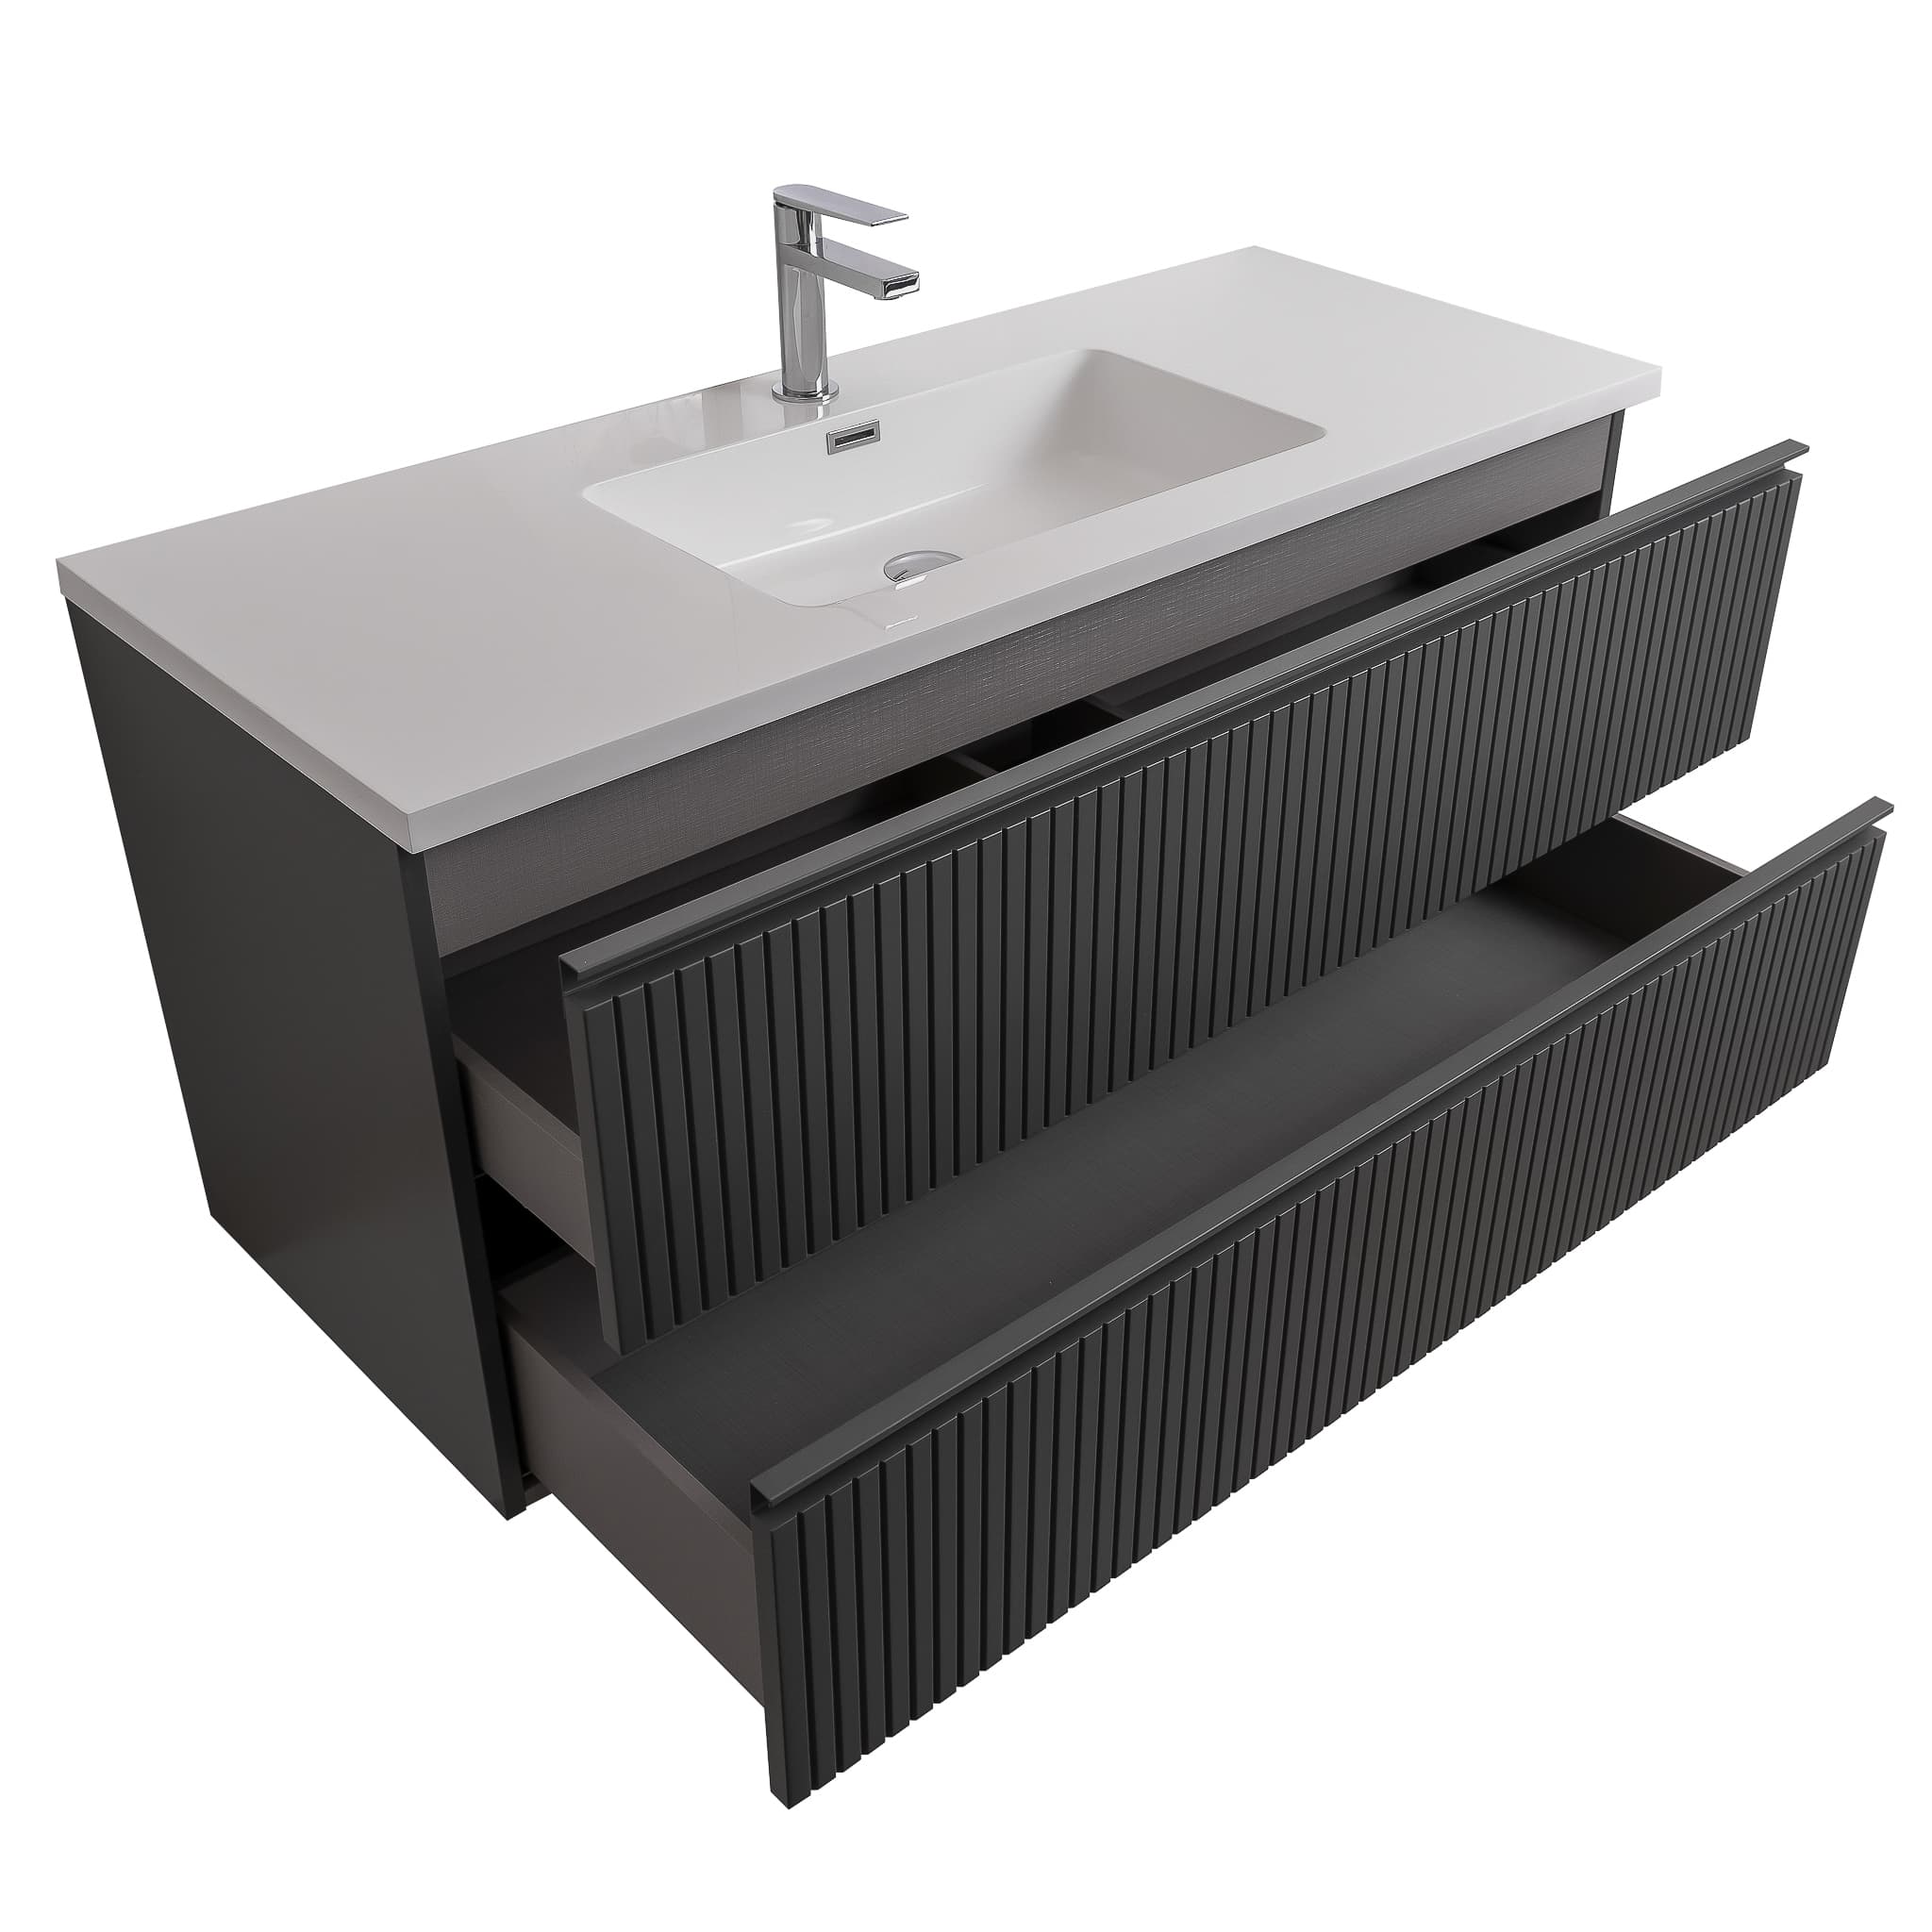 Ares 47.5 Matte Grey Cabinet, Square Cultured Marble Sink, Wall Mounted Modern Vanity Set